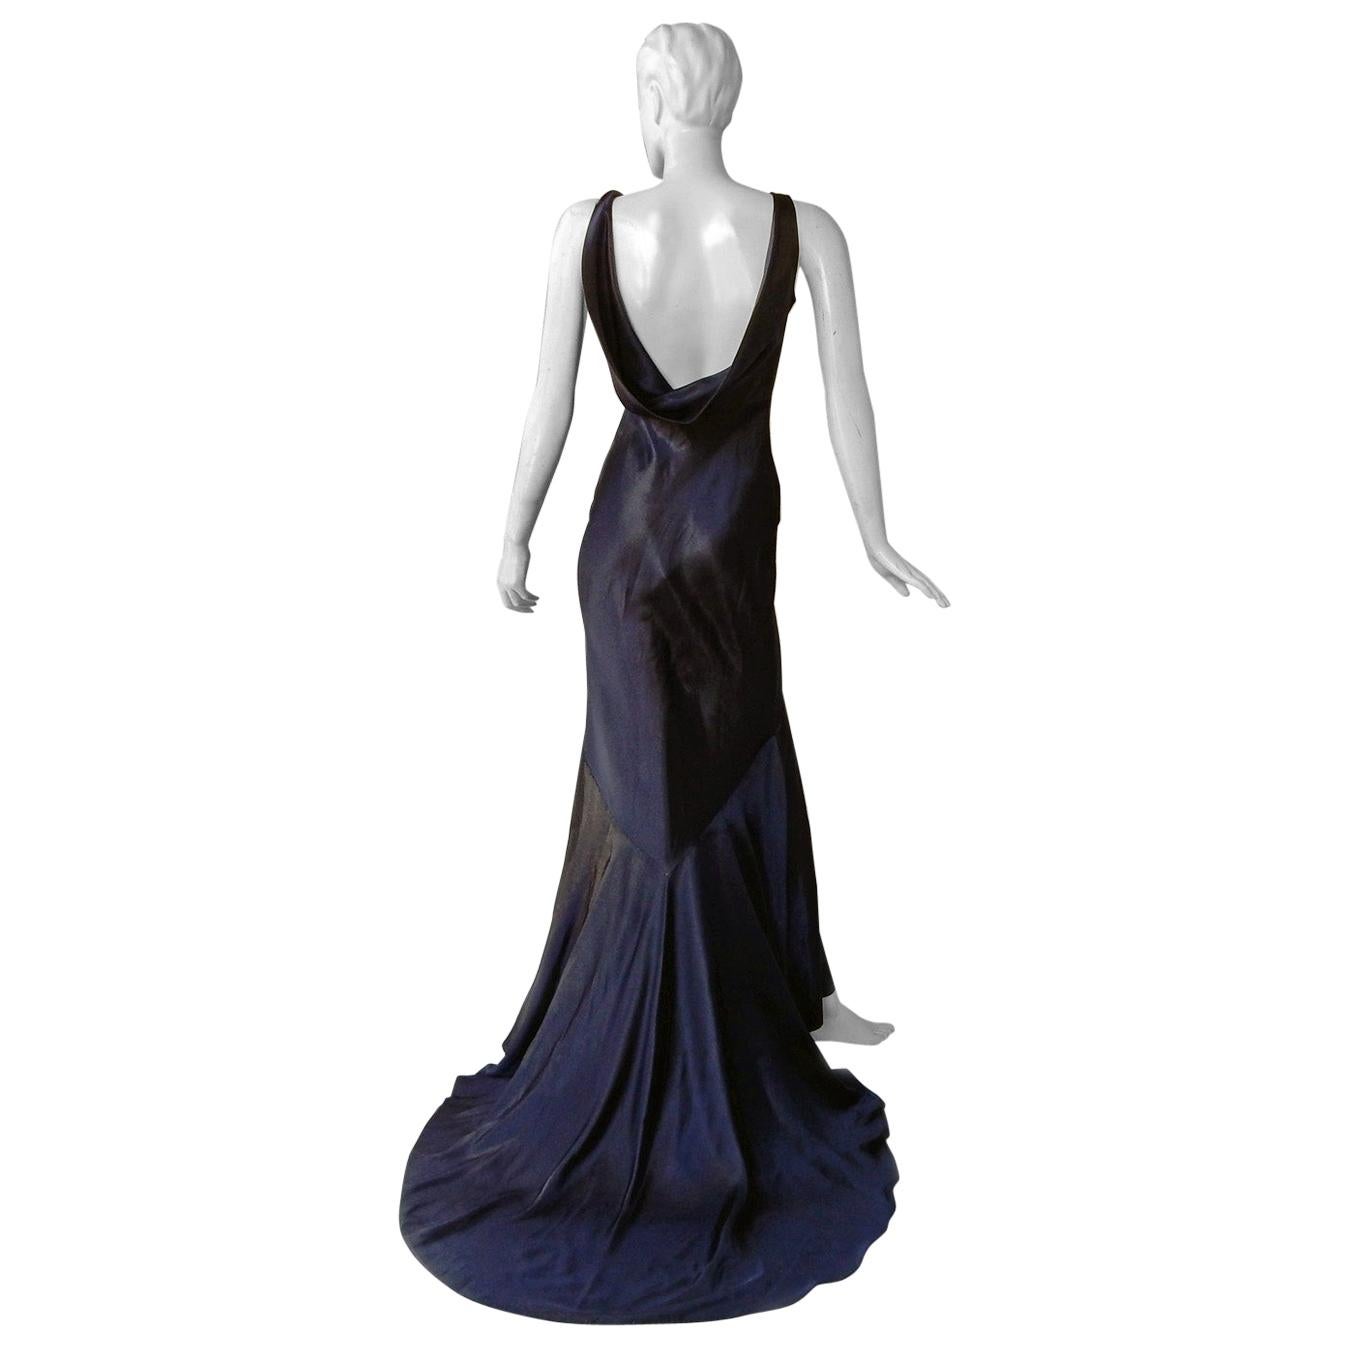 John Galliano 1997 Navy Blue Dramatic Vintage 1930's Harlowesque Gown